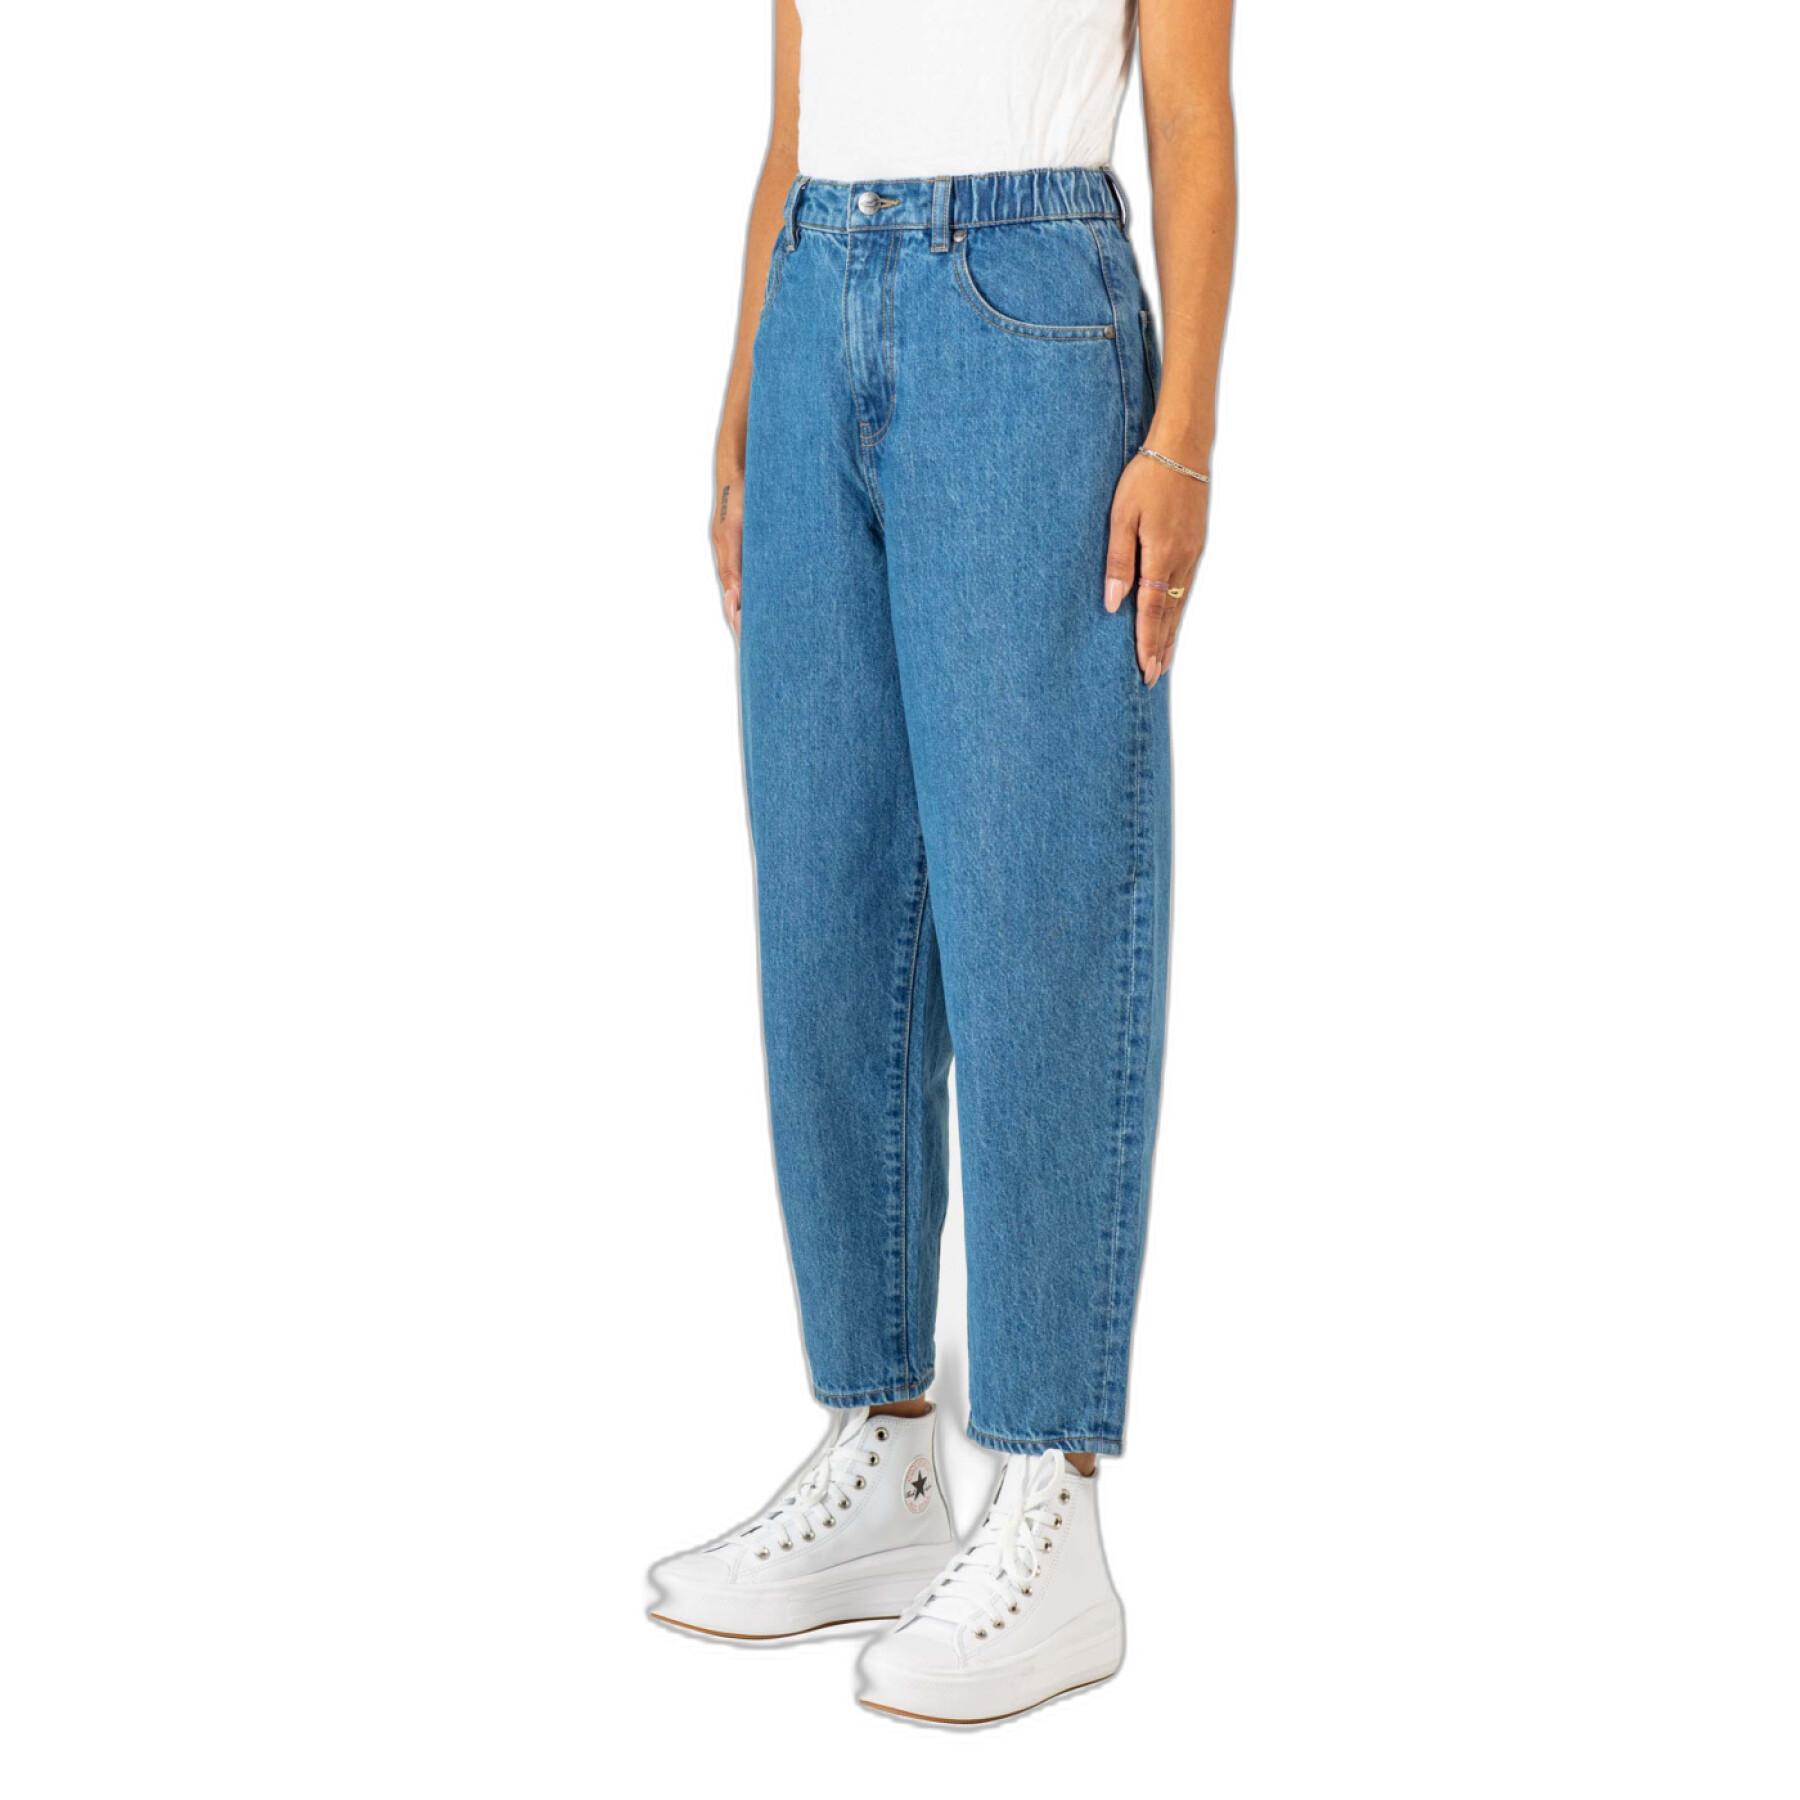 Jeans vrouw Reell Sky